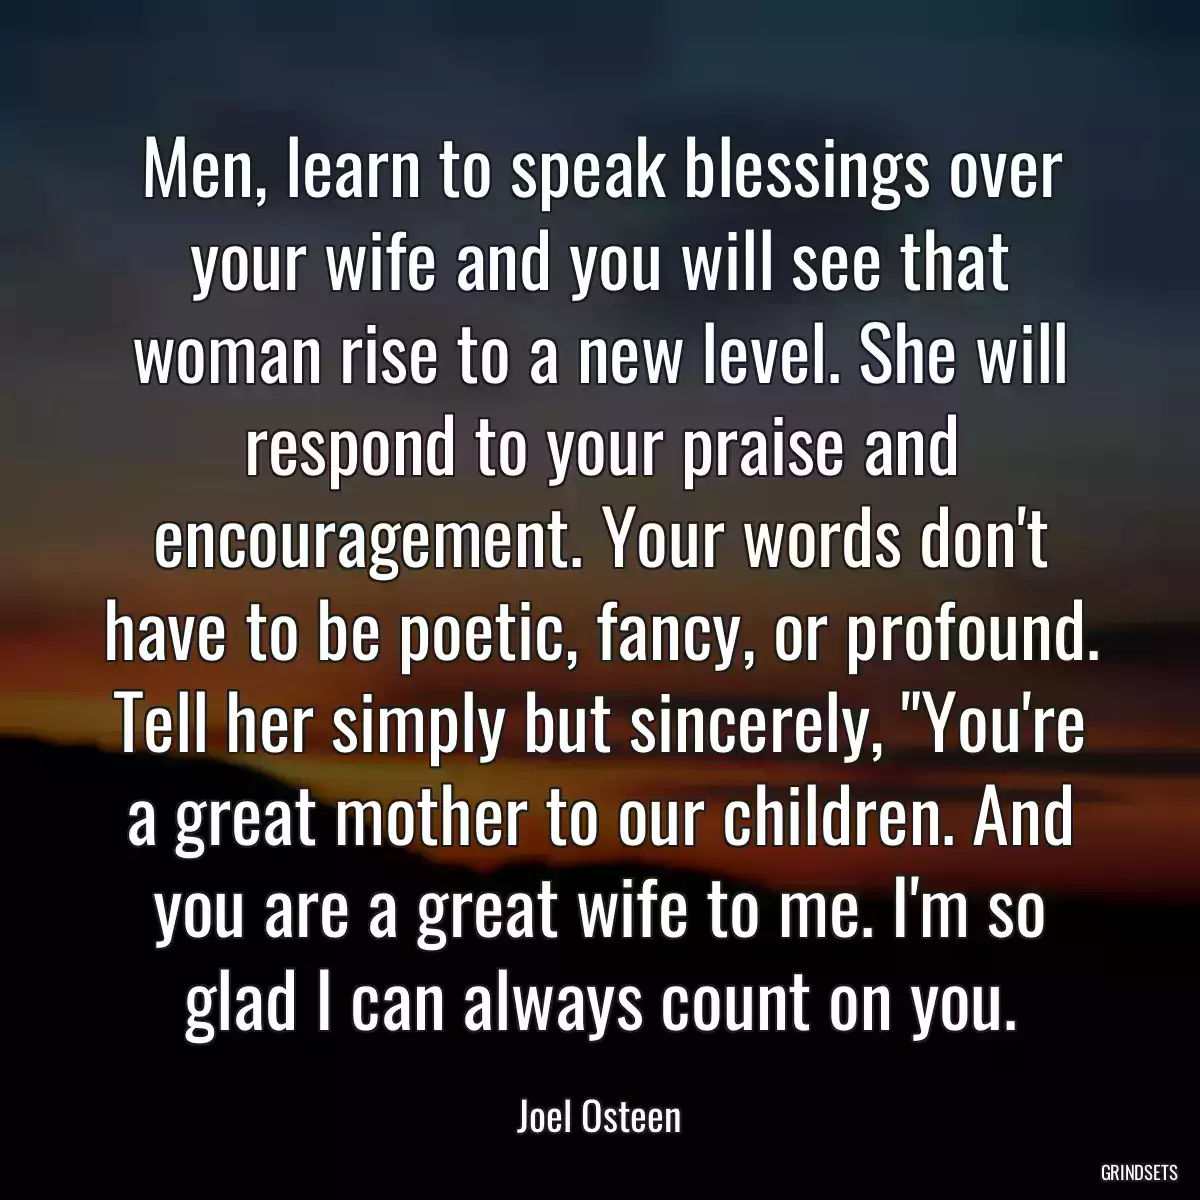 Men, learn to speak blessings over your wife and you will see that woman rise to a new level. She will respond to your praise and encouragement. Your words don\'t have to be poetic, fancy, or profound. Tell her simply but sincerely, \